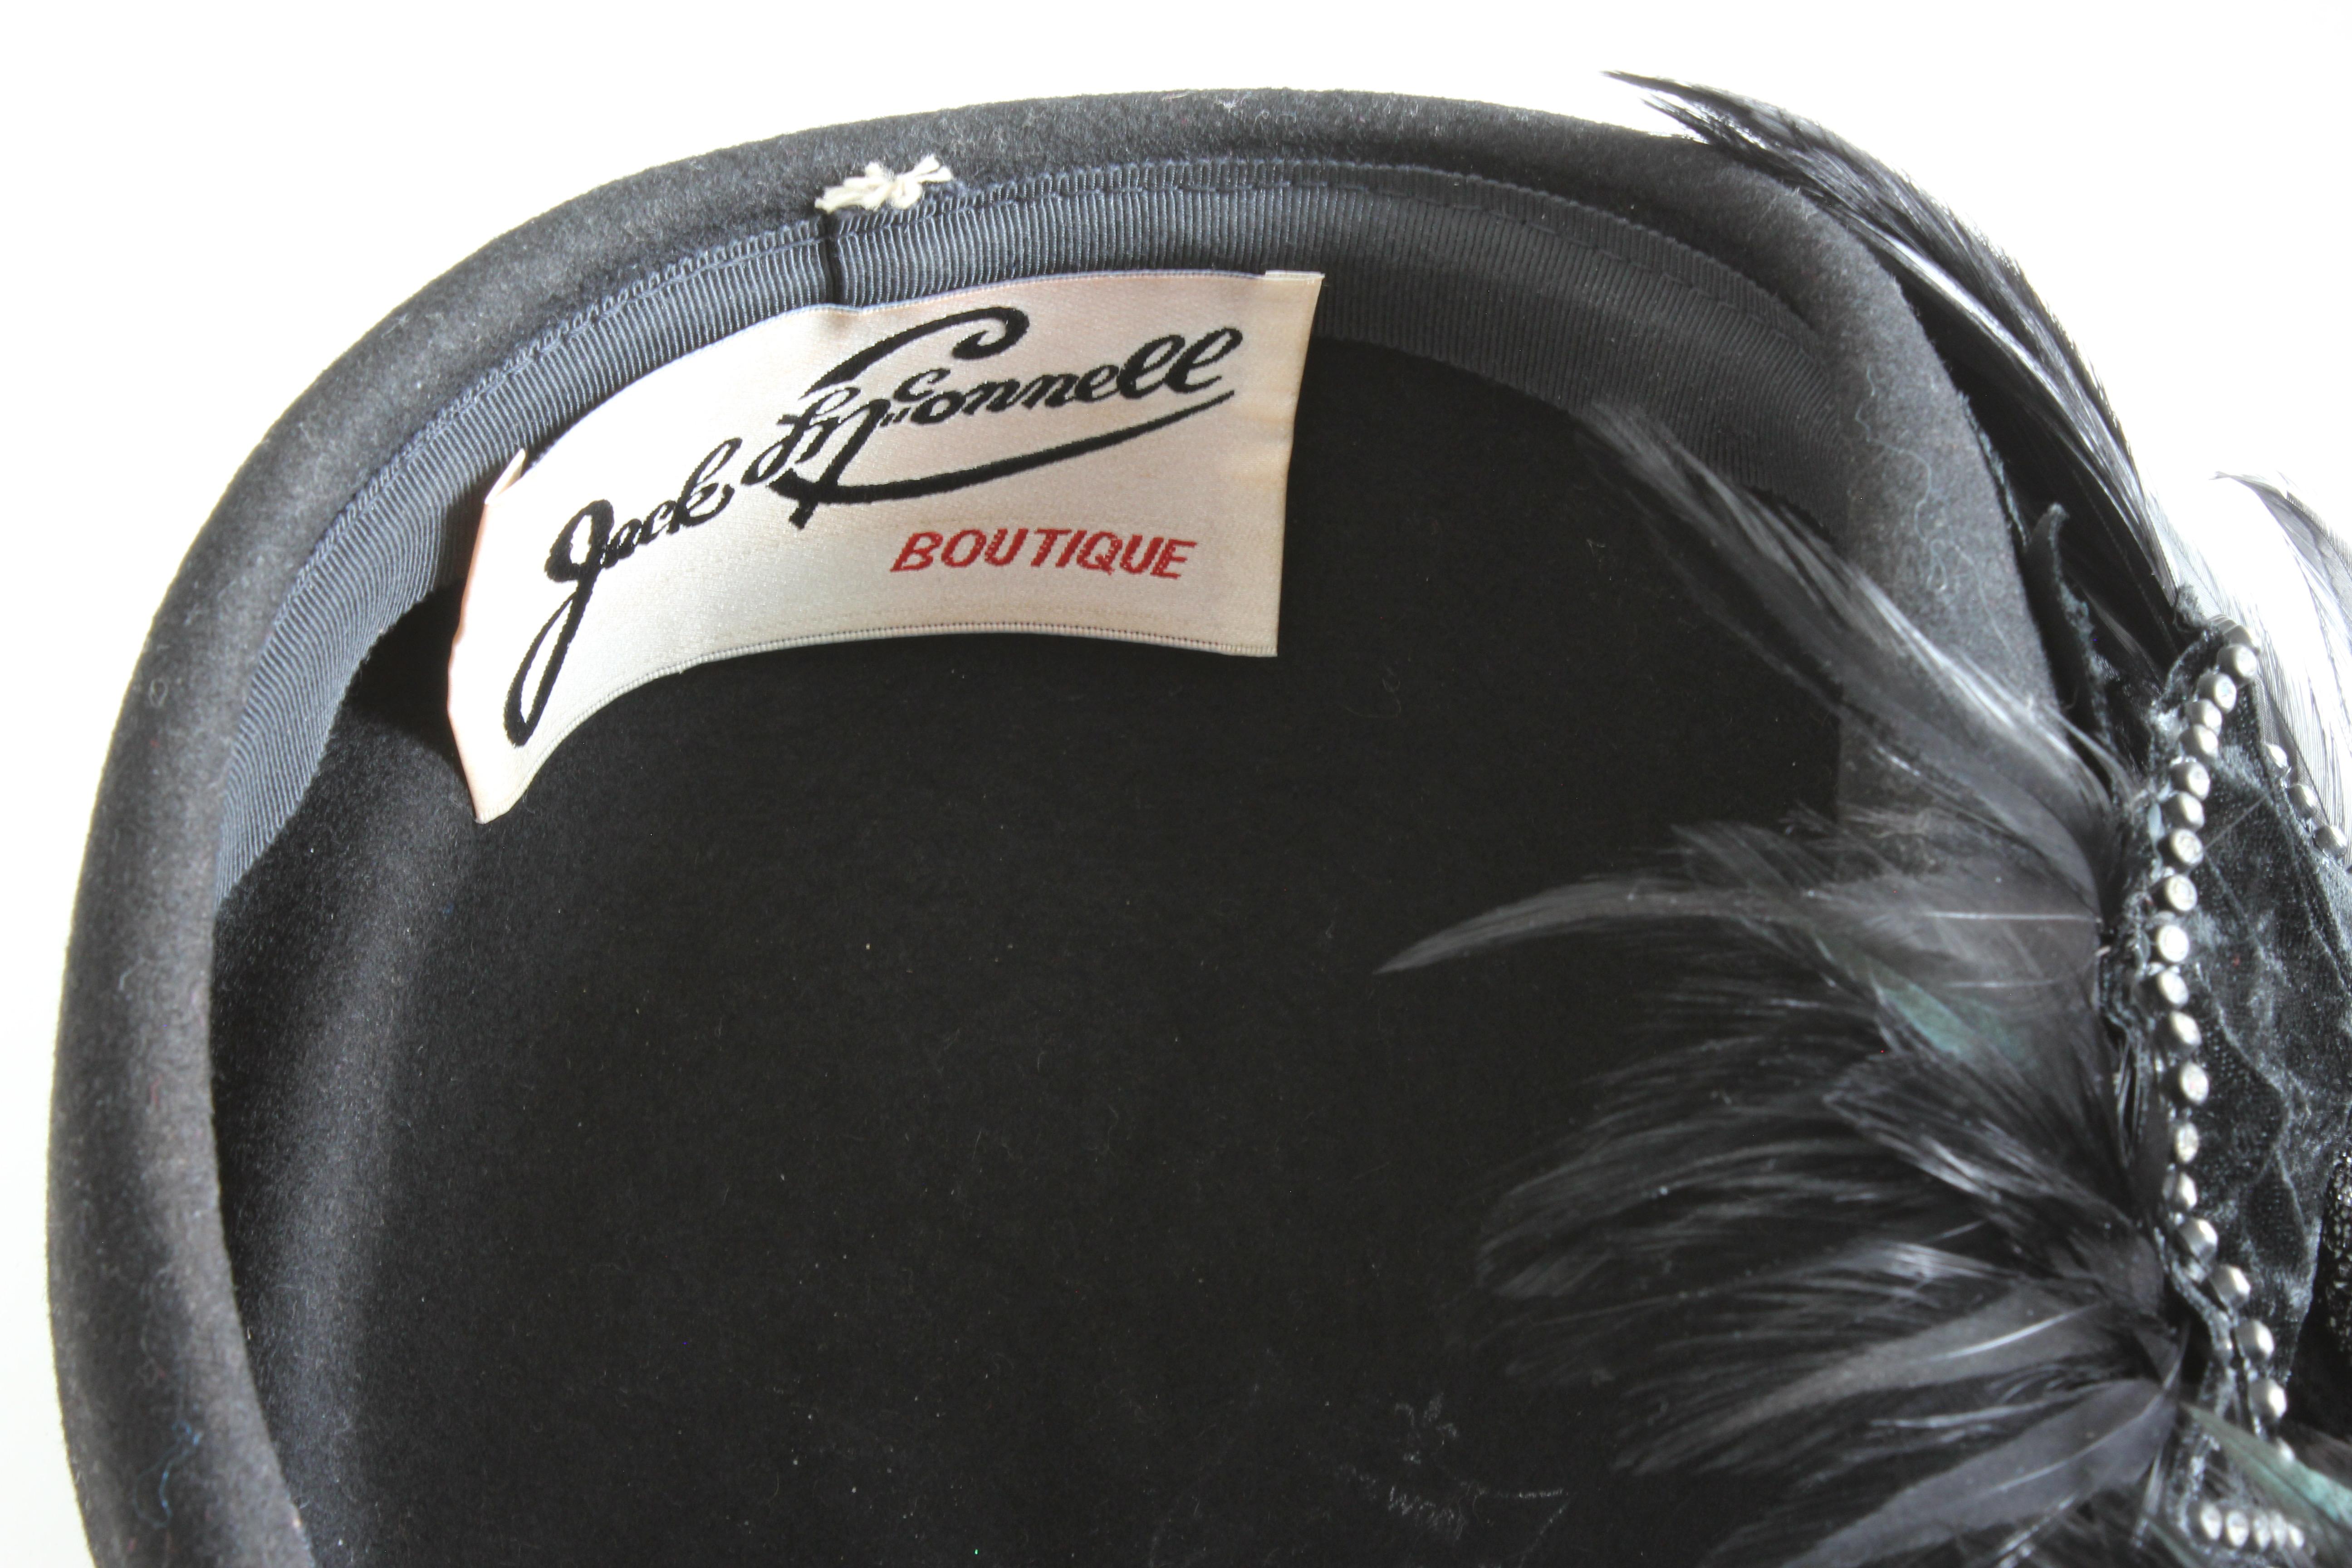 Jack McConnell Boutique Black Wool Clochette Hat with Feathers 1960s Bollman Hat 4